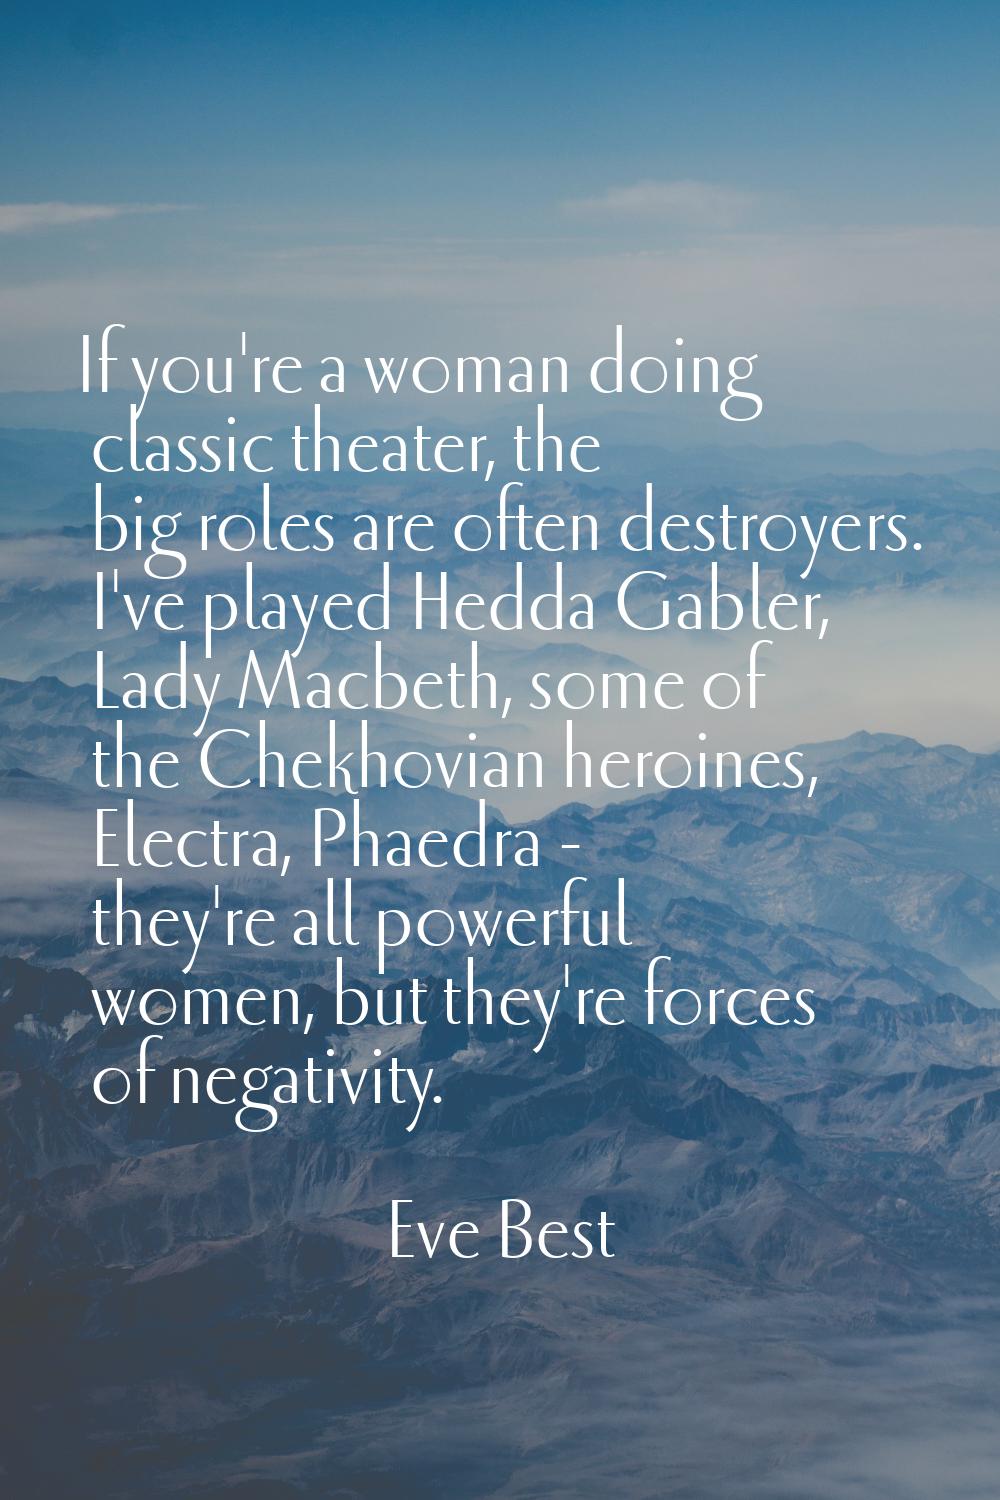 If you're a woman doing classic theater, the big roles are often destroyers. I've played Hedda Gabl